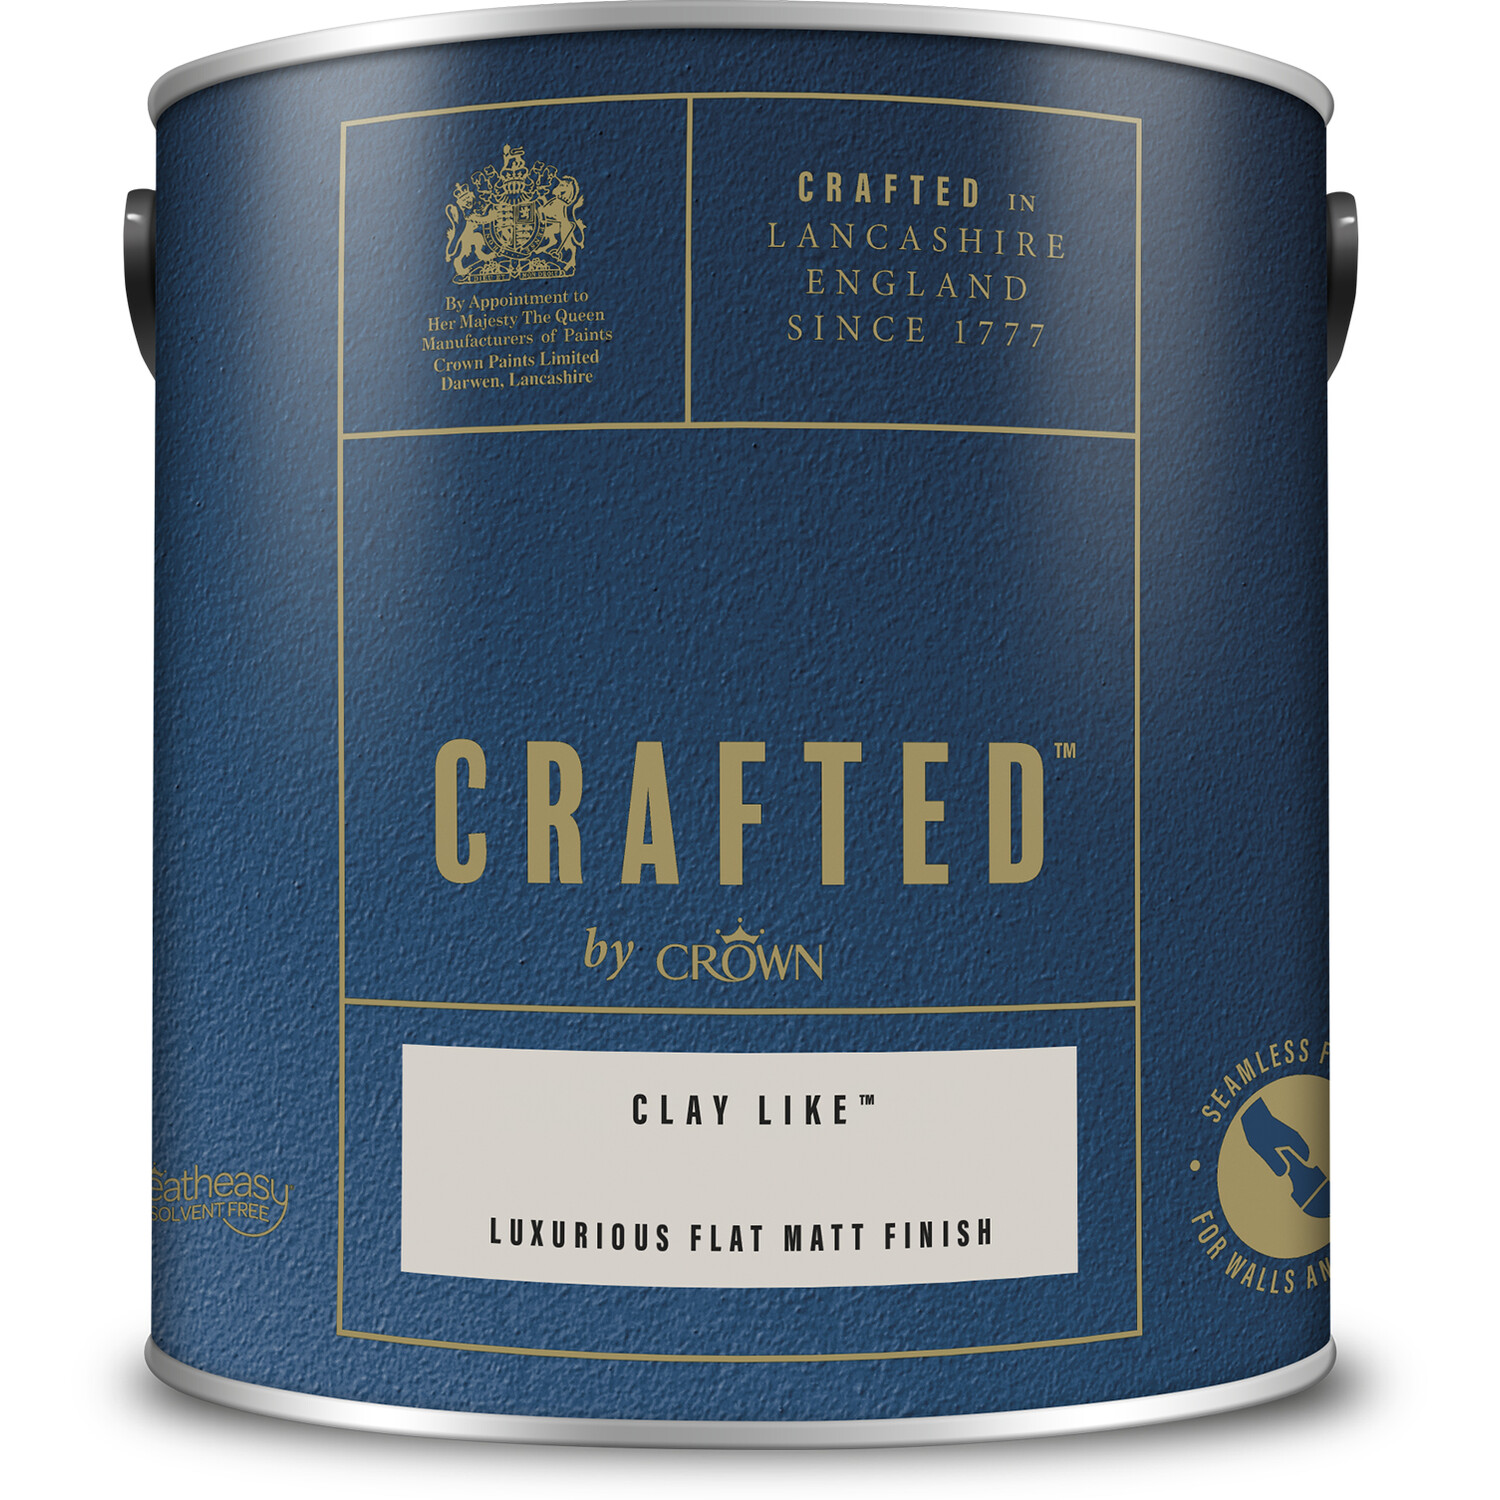 Crown Crafted Walls and Wood Clay Like Luxurious Flat Matt Paint 2.5L Image 2